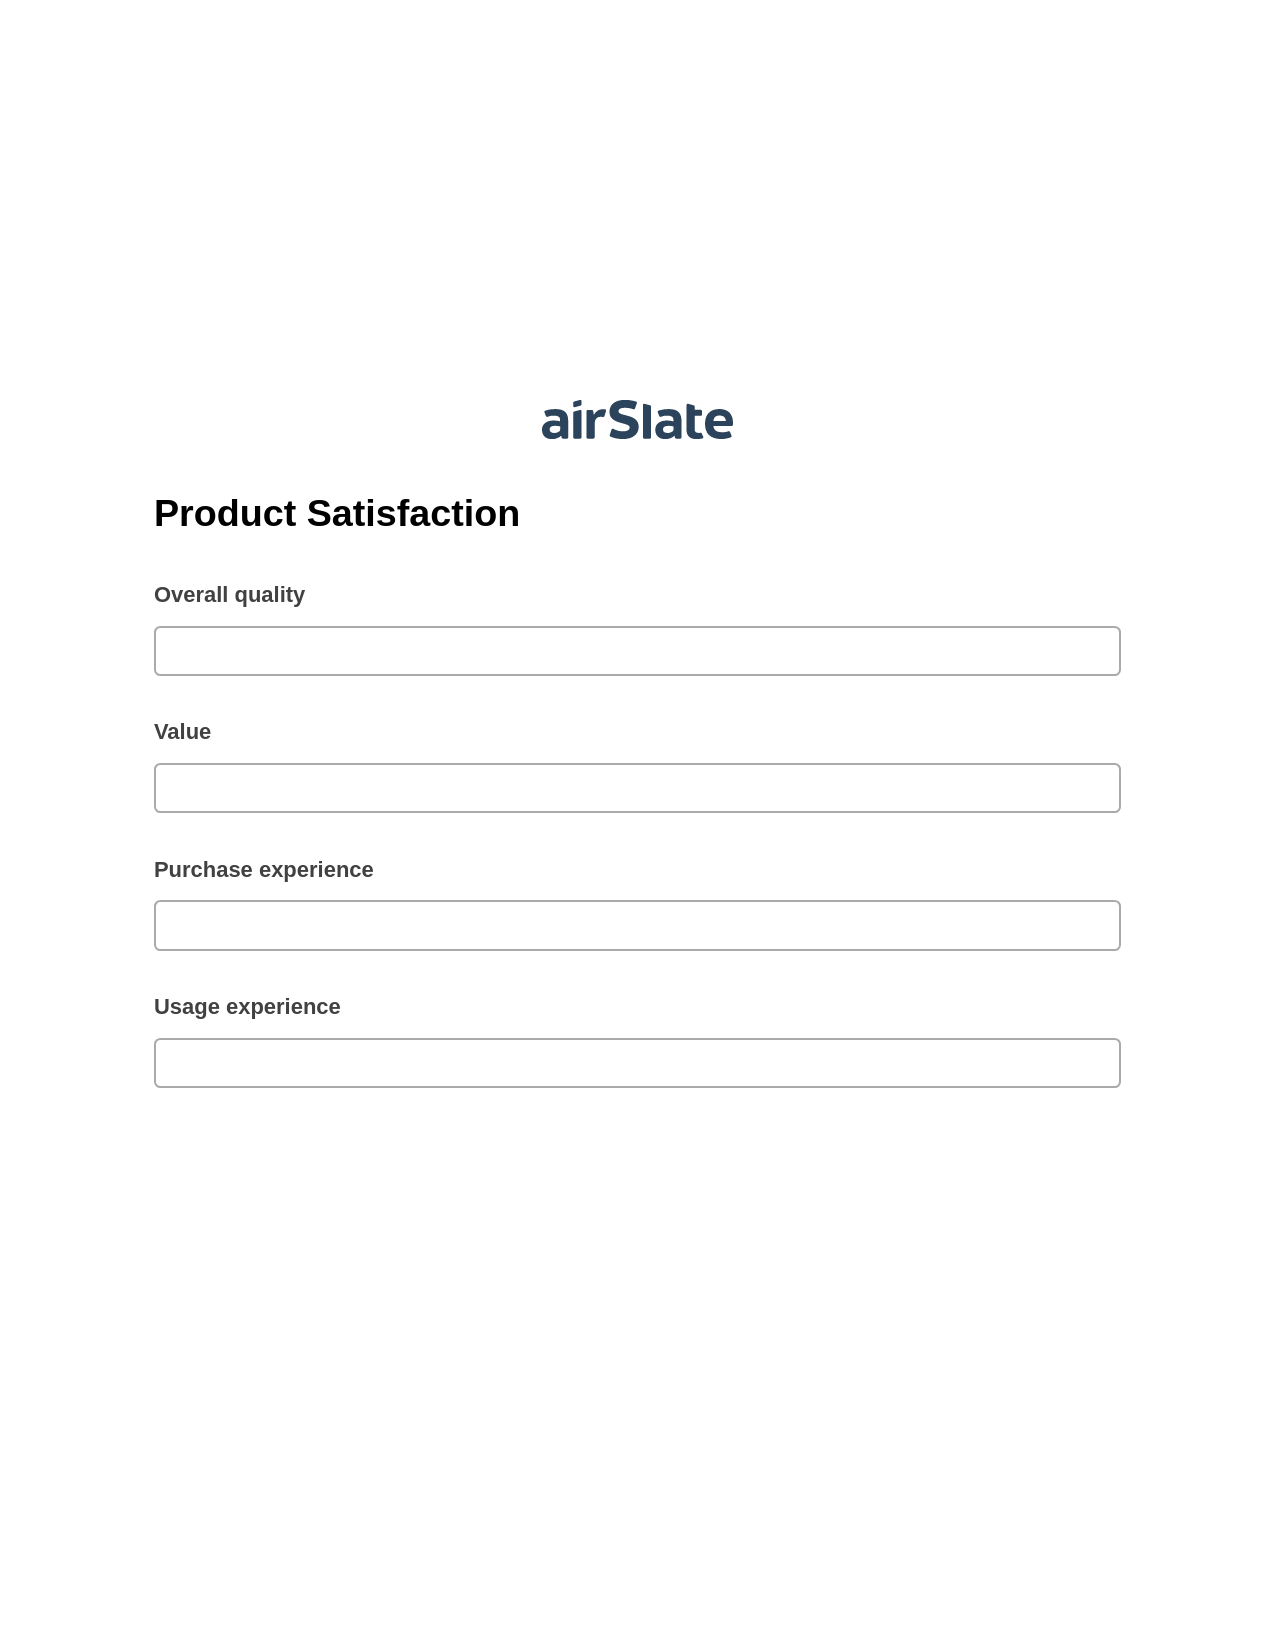 Product Satisfaction Pre-fill Dropdowns from CSV File Bot, Update MS Dynamics 365 Records Bot, Post-finish Document Bot